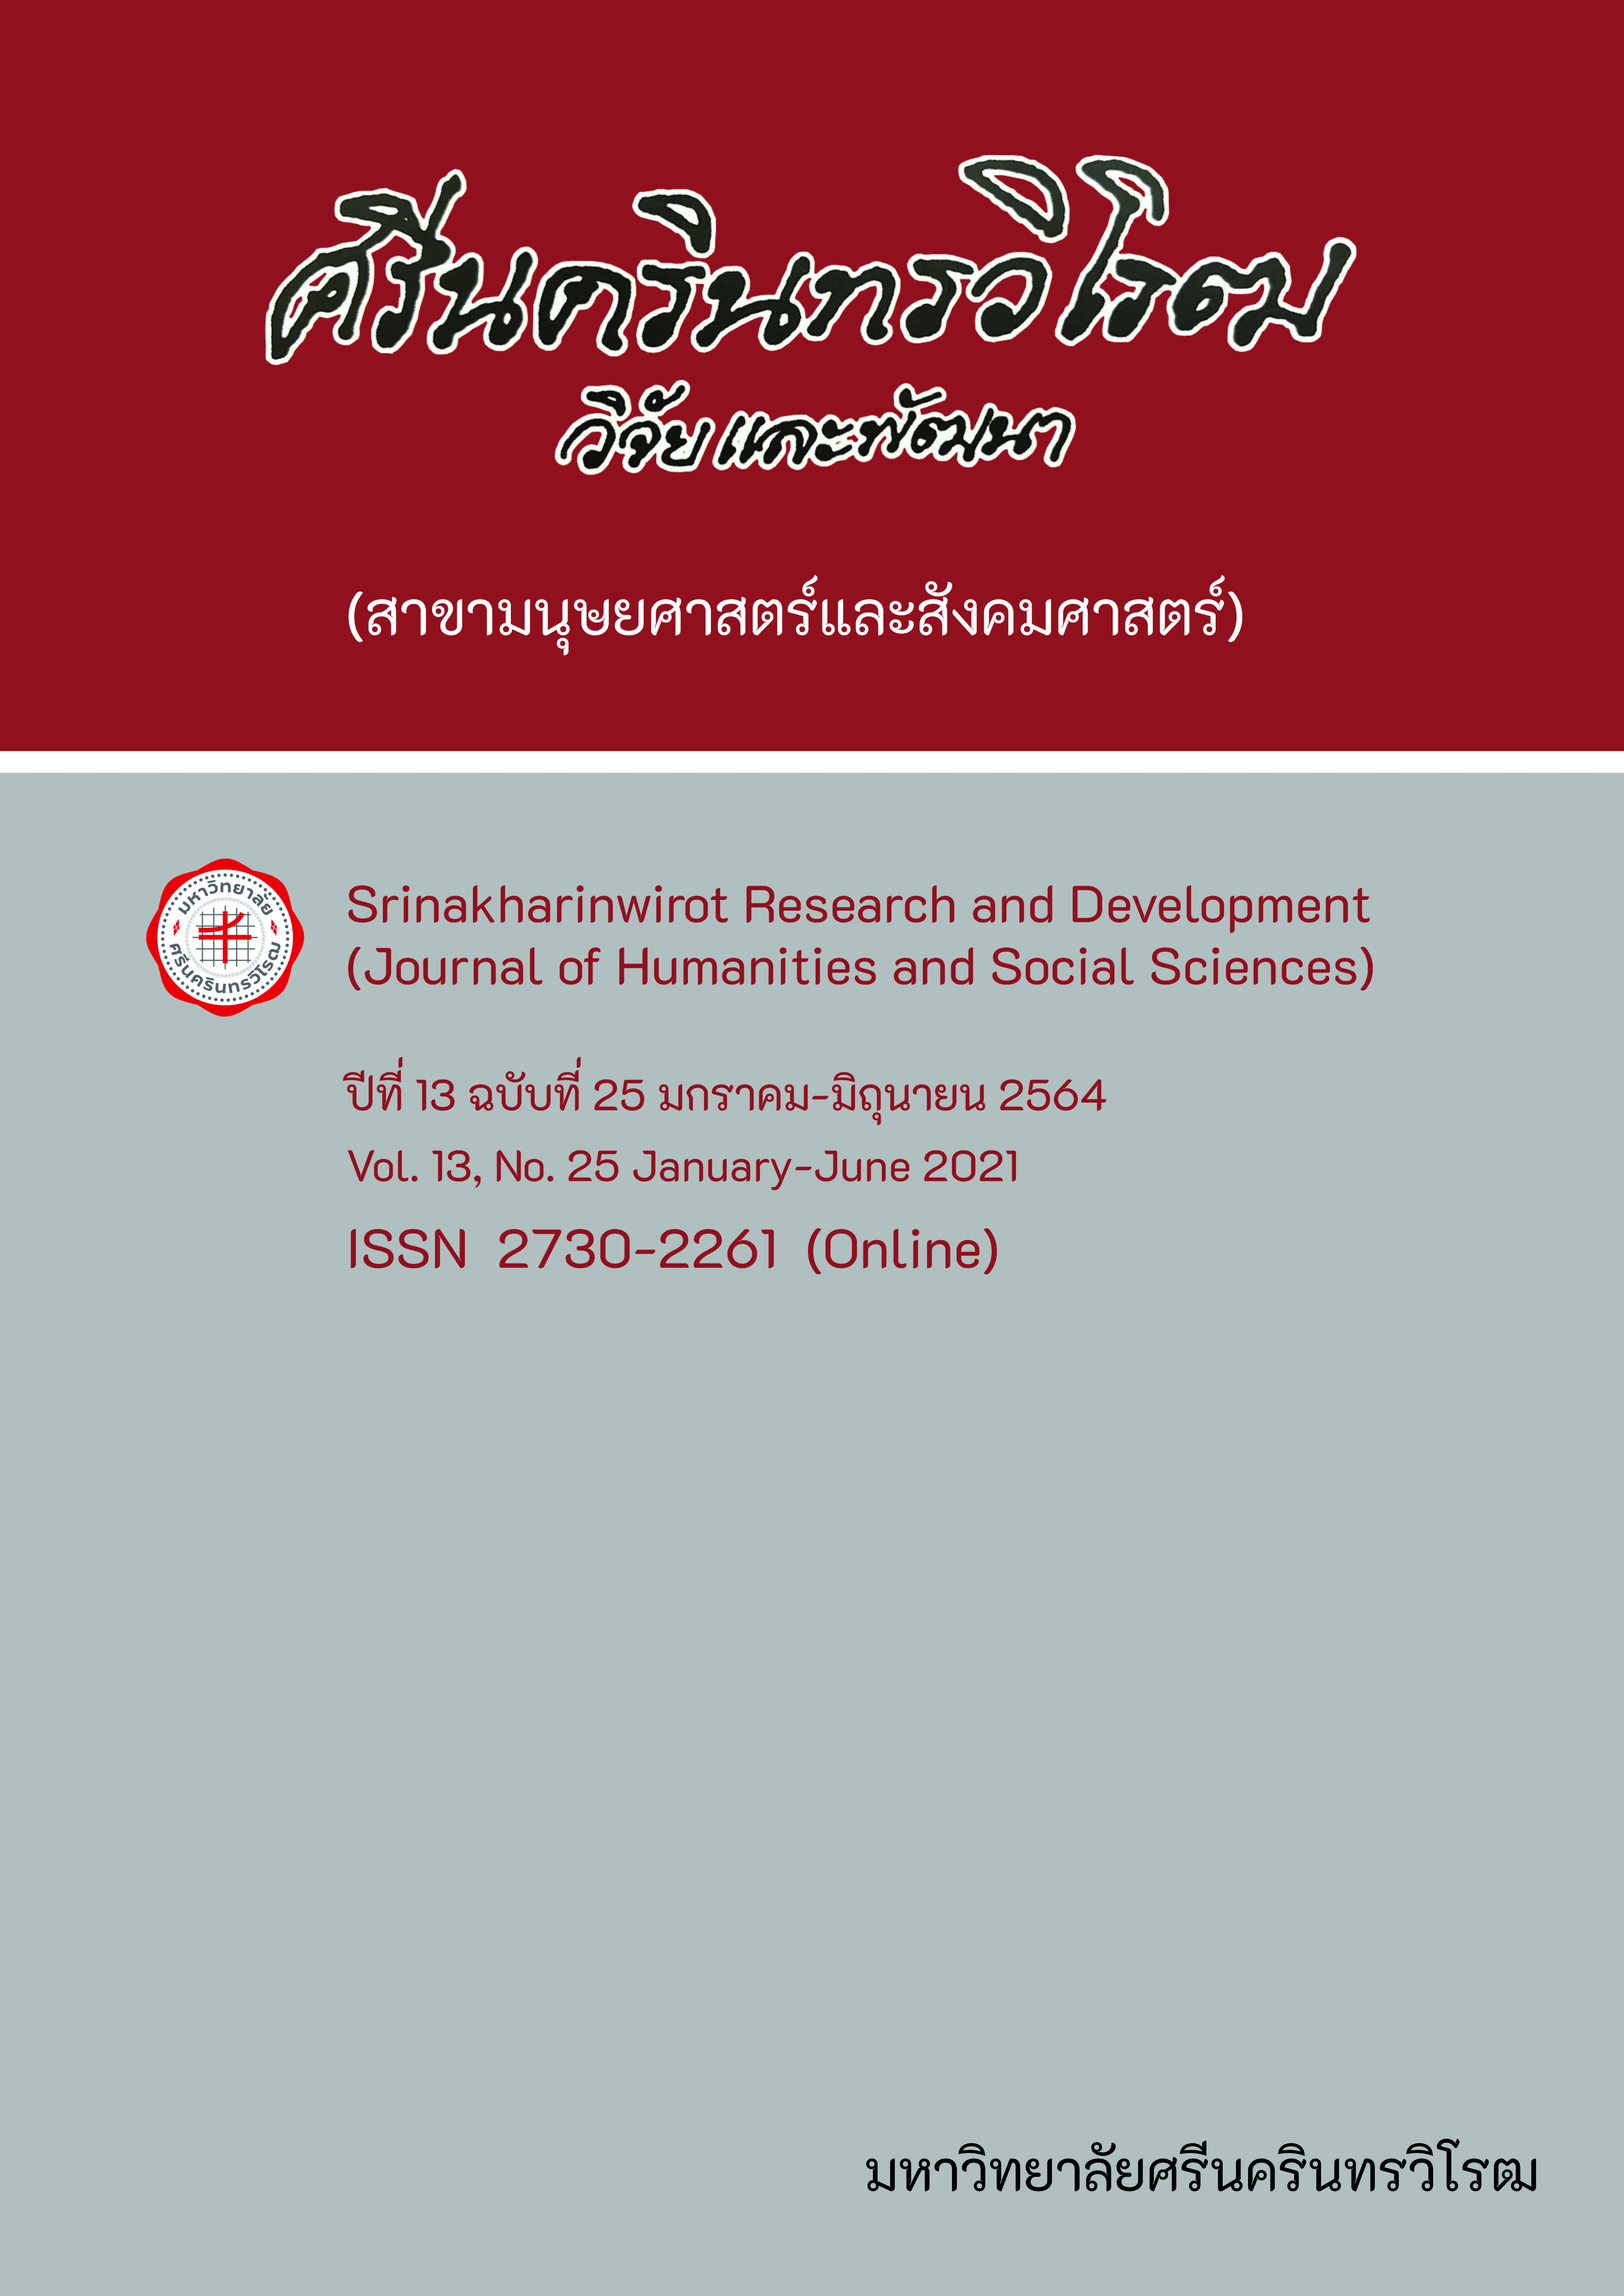 					View Vol. 13 No. 25, January-June (2021): Srinakharinwirot Research and Development (Journal of Humanities and Social Sciences)
				